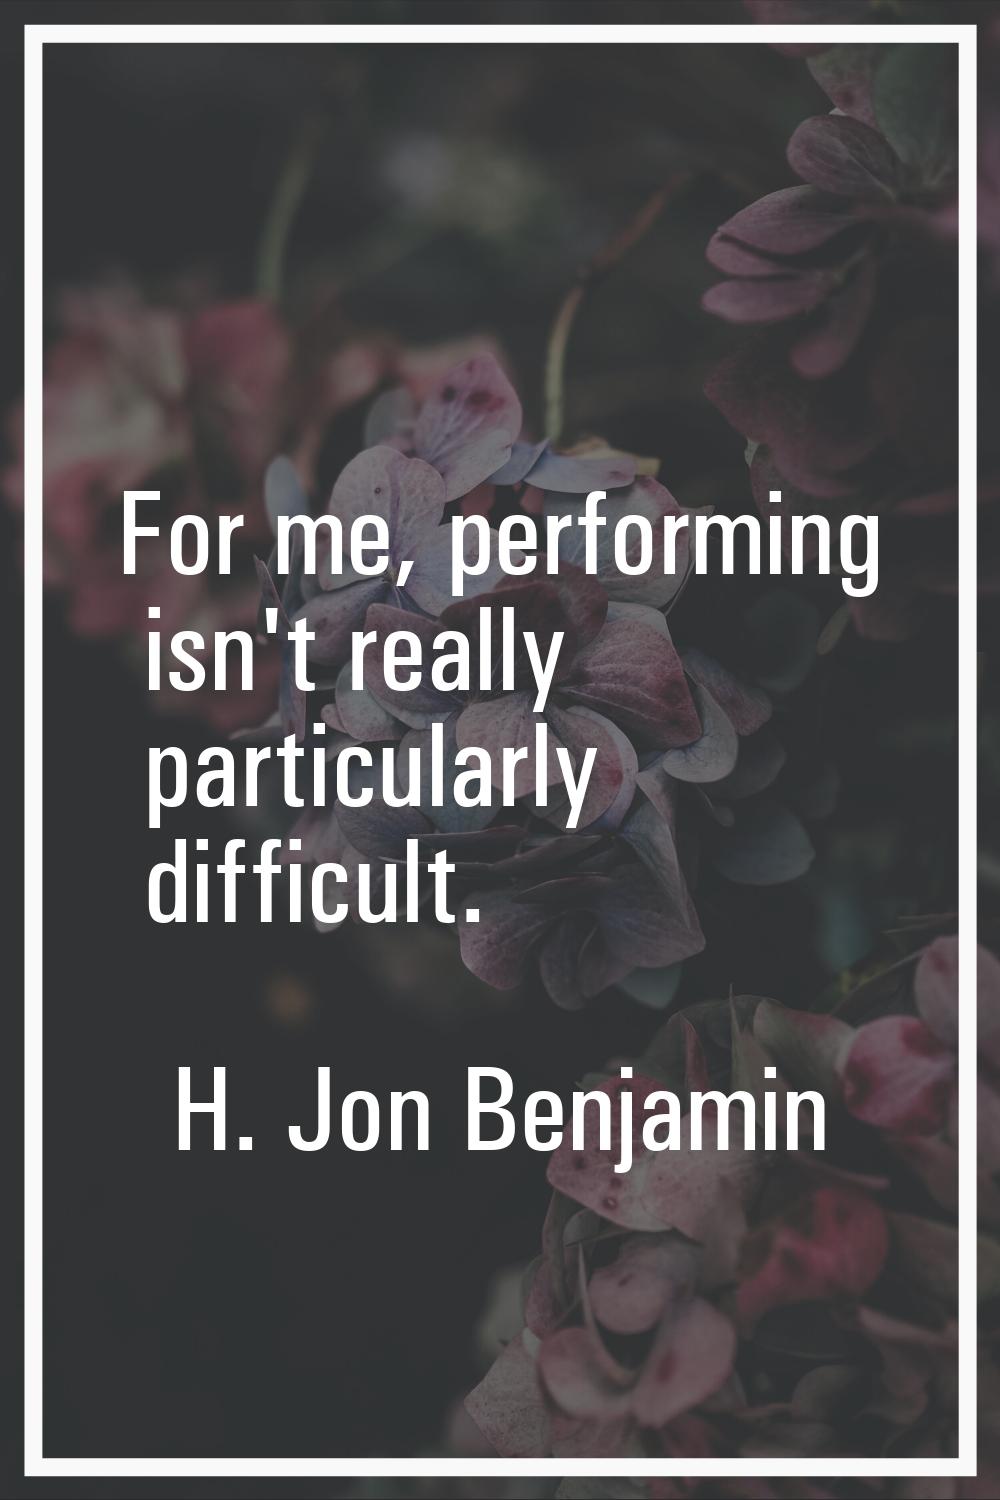 For me, performing isn't really particularly difficult.